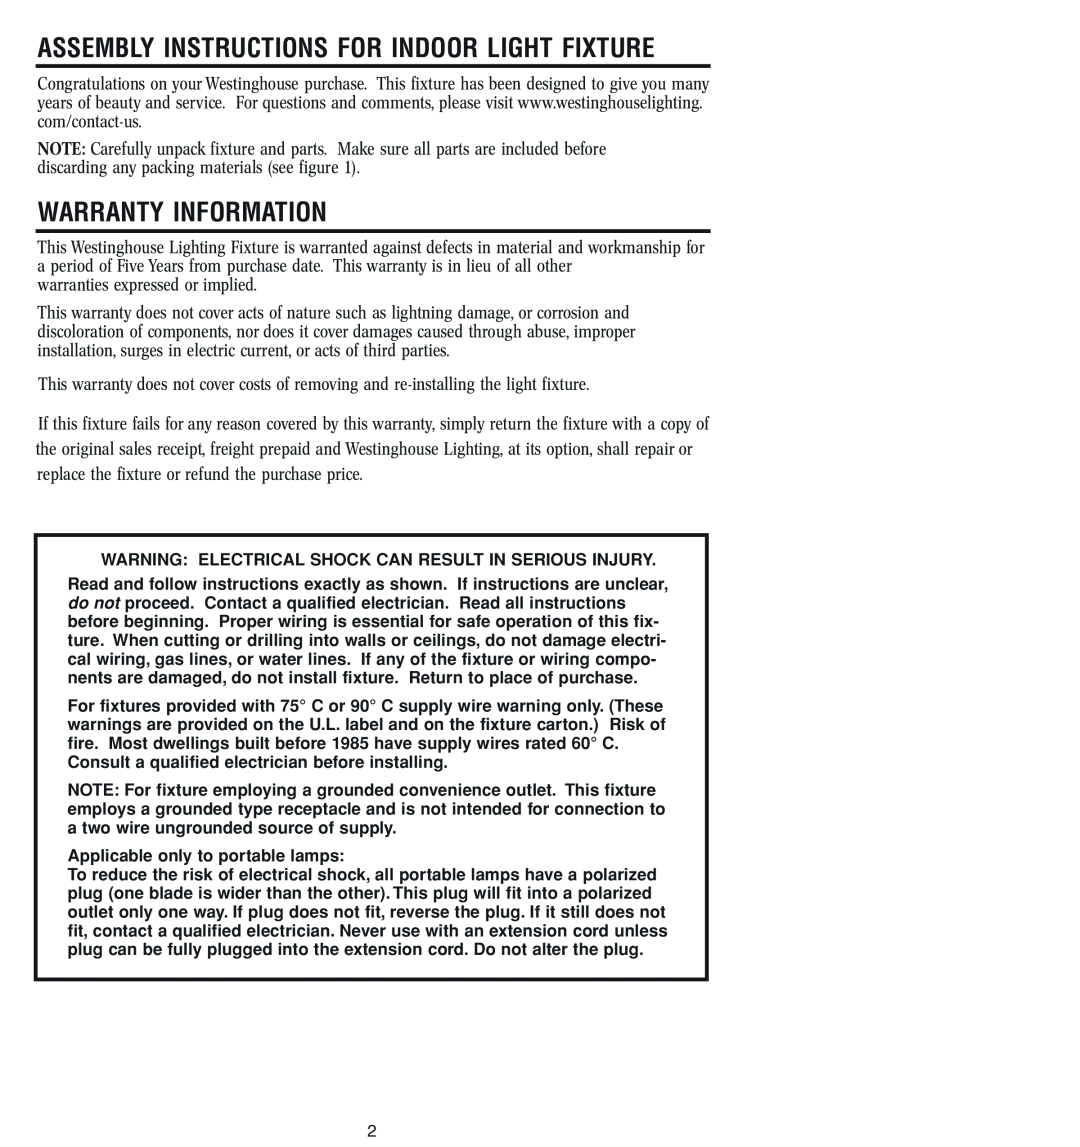 Westinghouse W-045 owner manual Warranty Information, Assembly Instructions For Indoor Light Fixture 